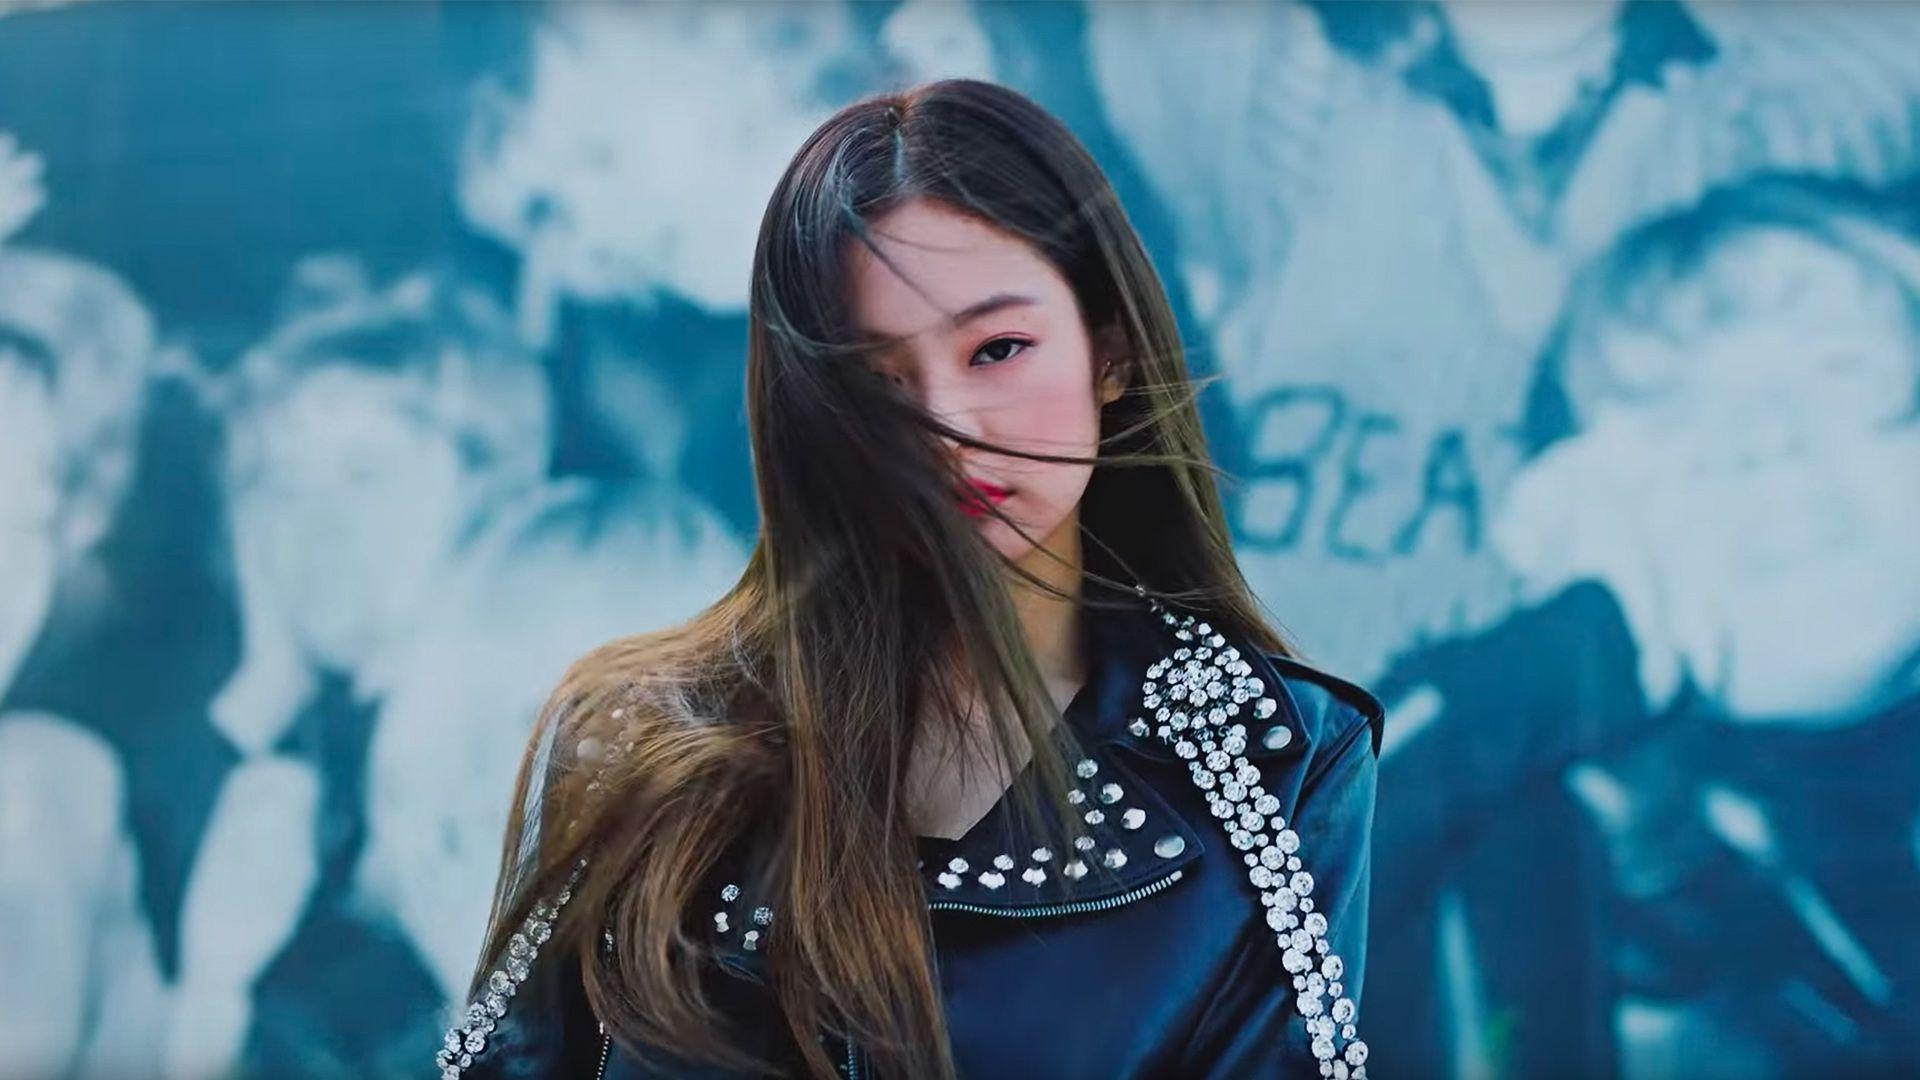 BLACKPINK's Jennie makes her 'Solo' debut and the Internet